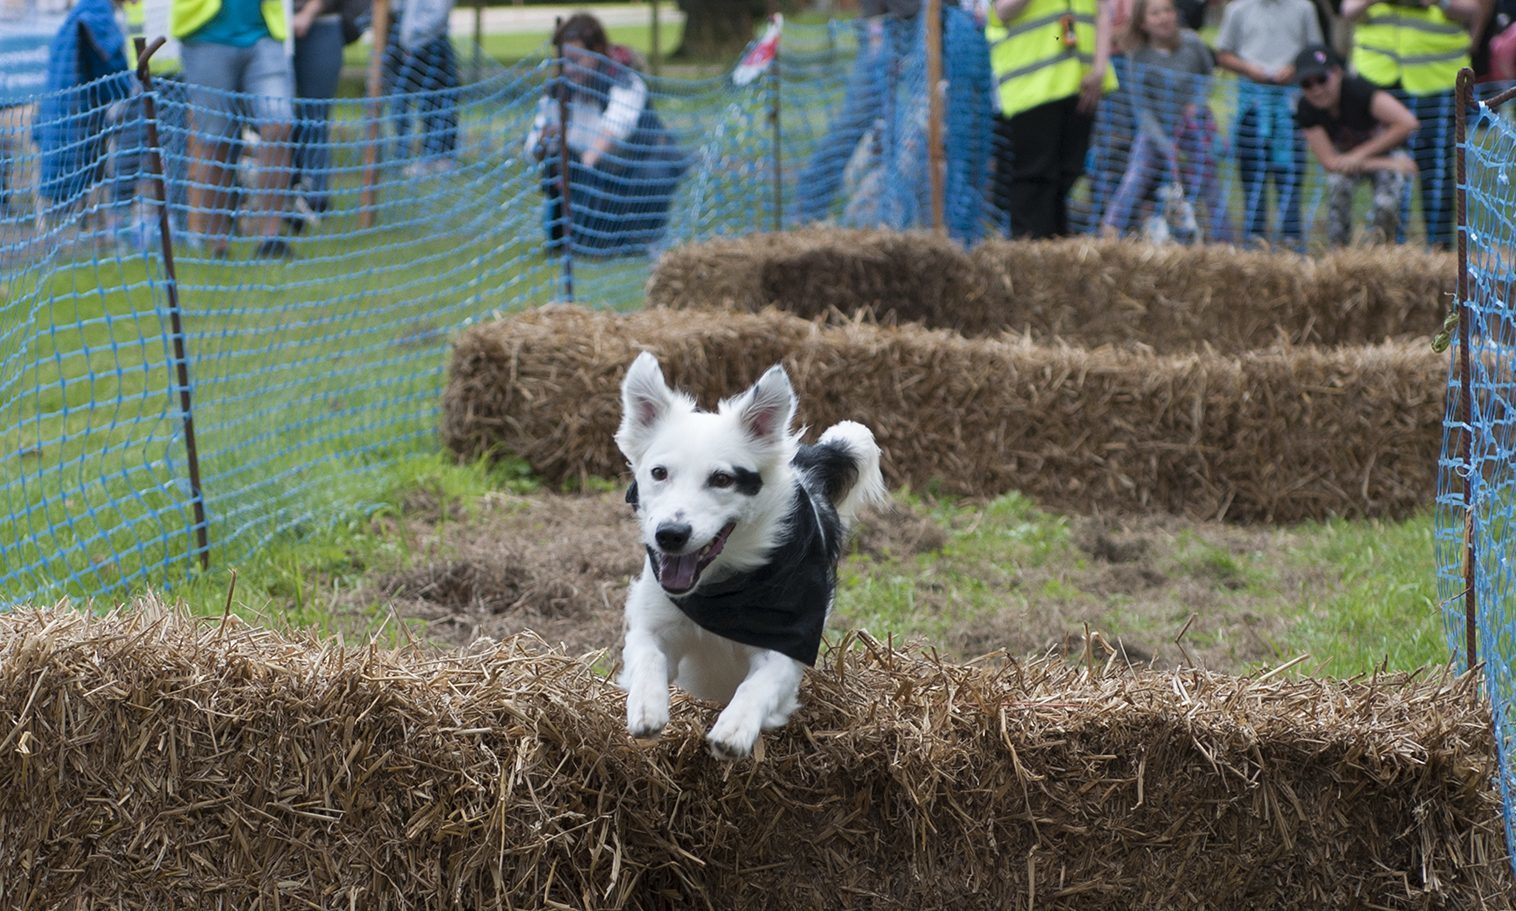 The Dogs Day Out event at Glamis Castle.